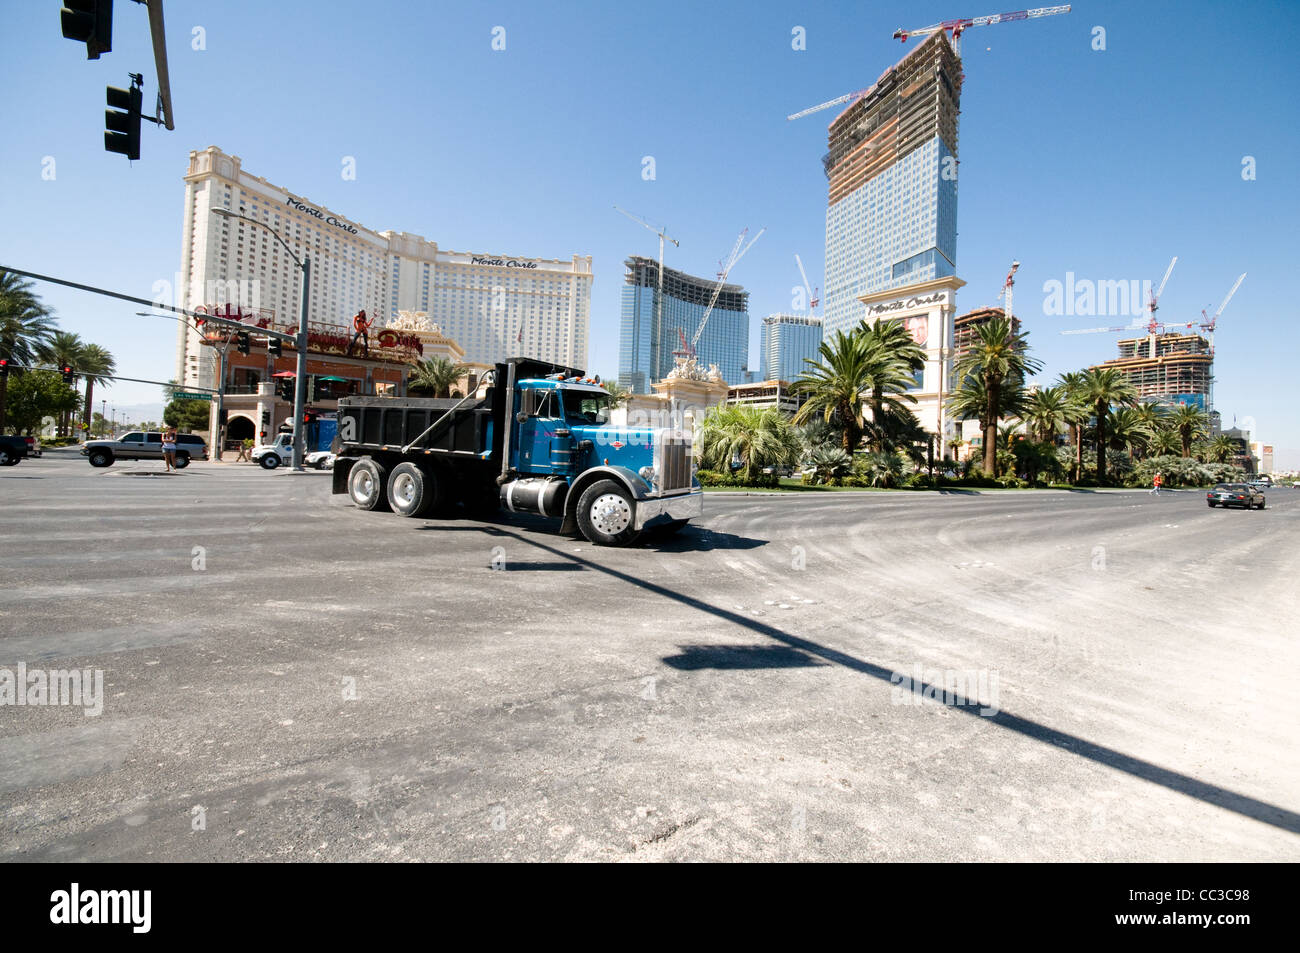 Construction truck in front of the Monte Carlo and Cosmopolitan Hotels Stock Photo